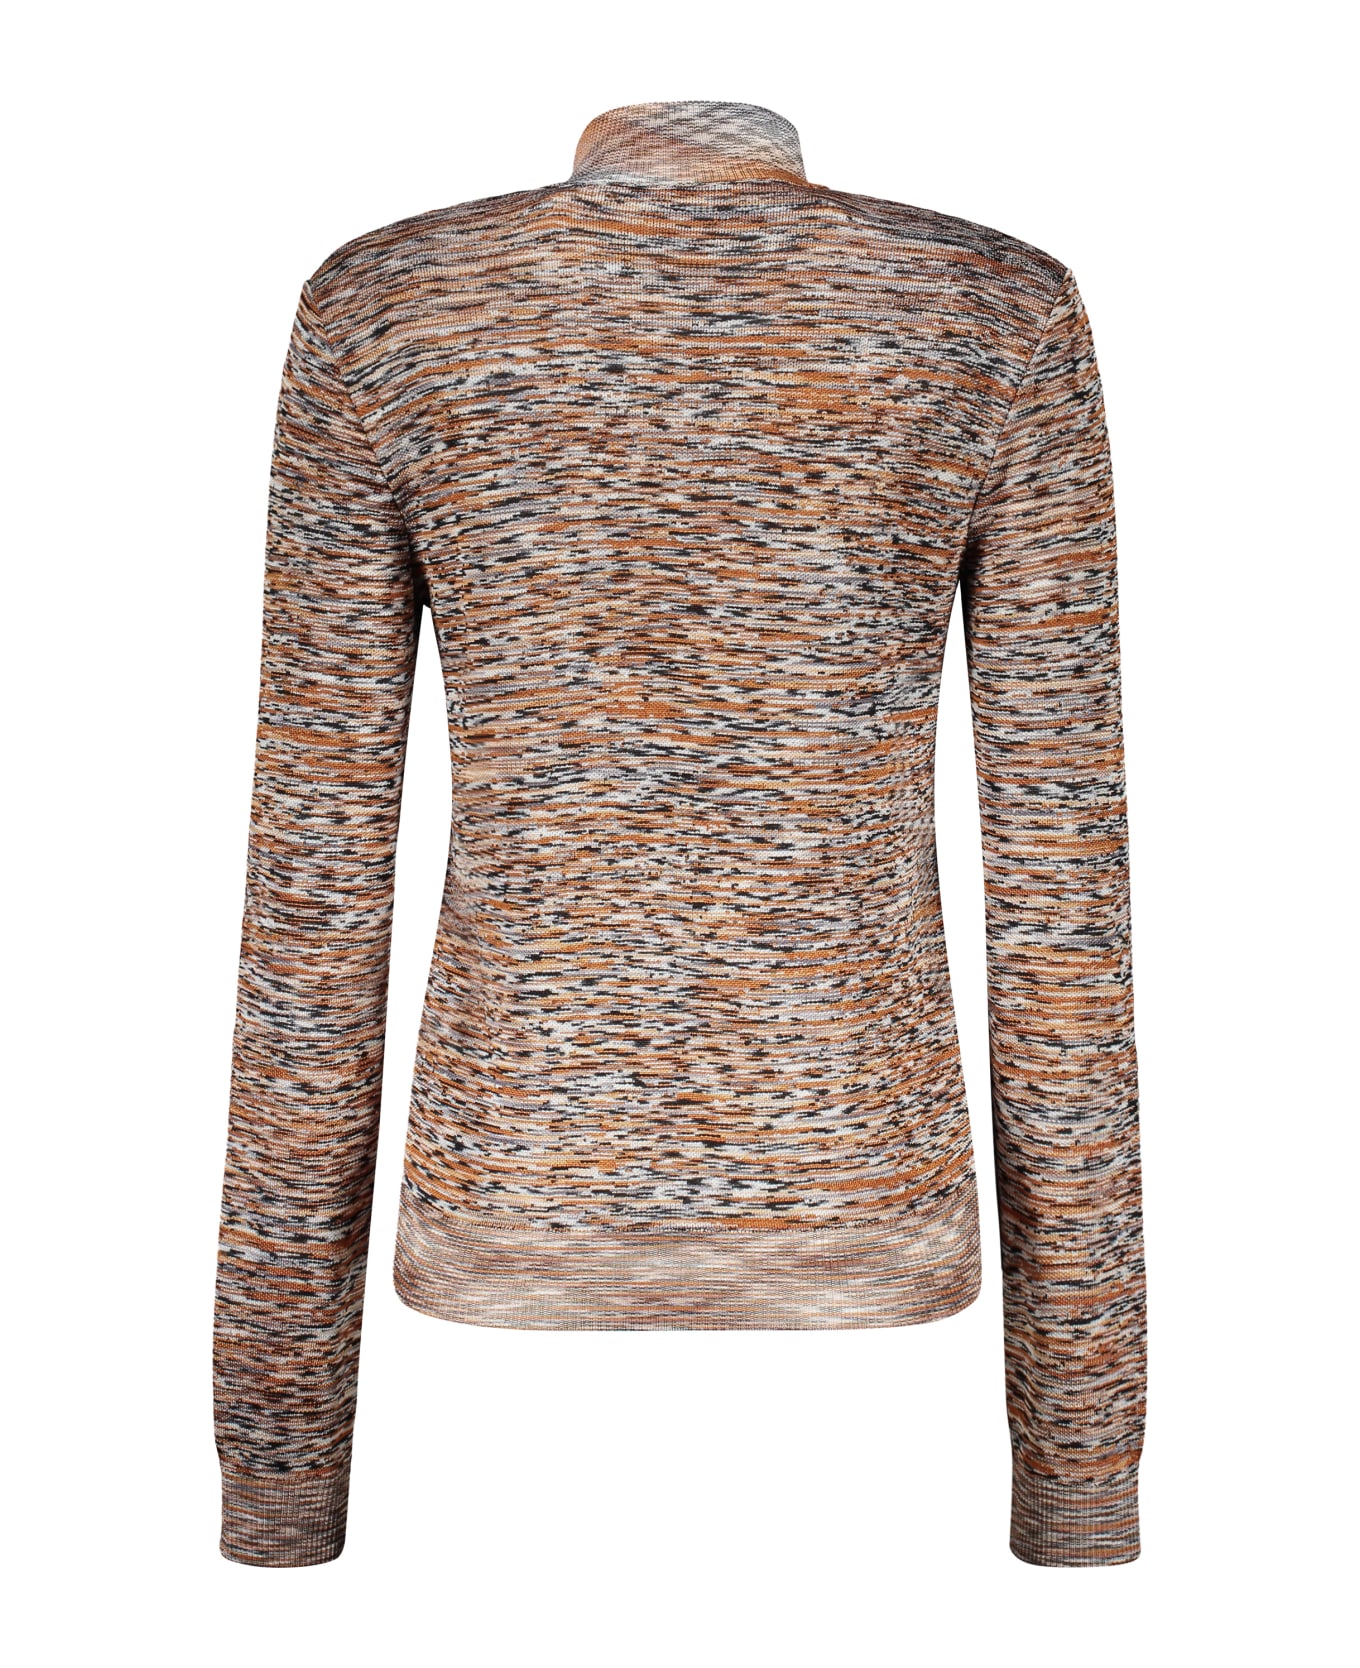 Missoni Knitted Sweater - brown